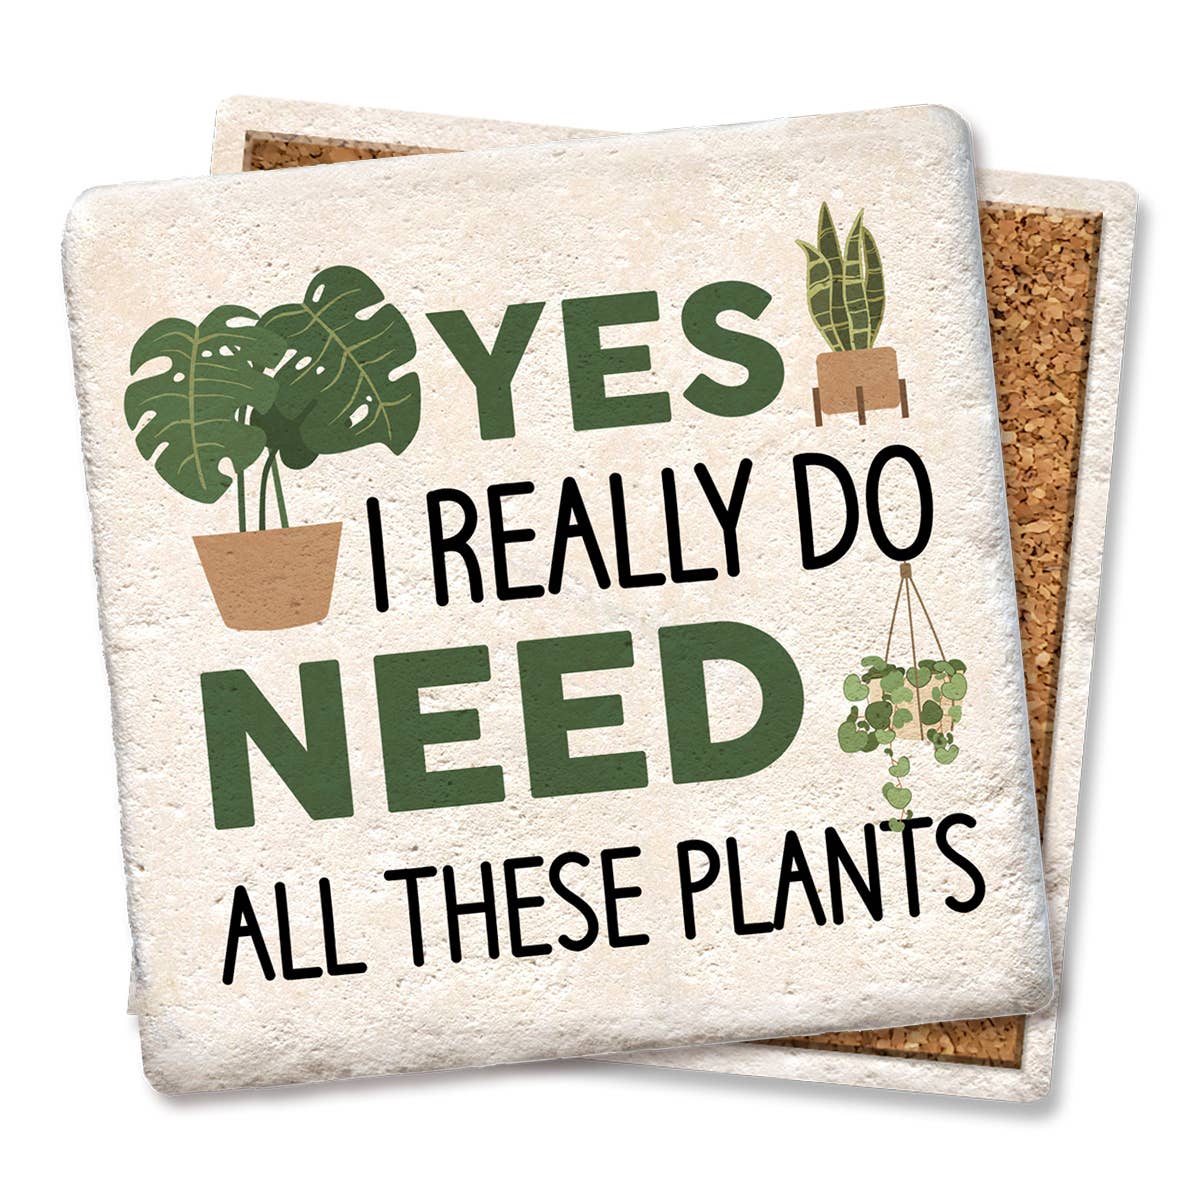 Coaster Yes, I really do need all these plants drink coaster  Tipsy Coasters & Gifts   